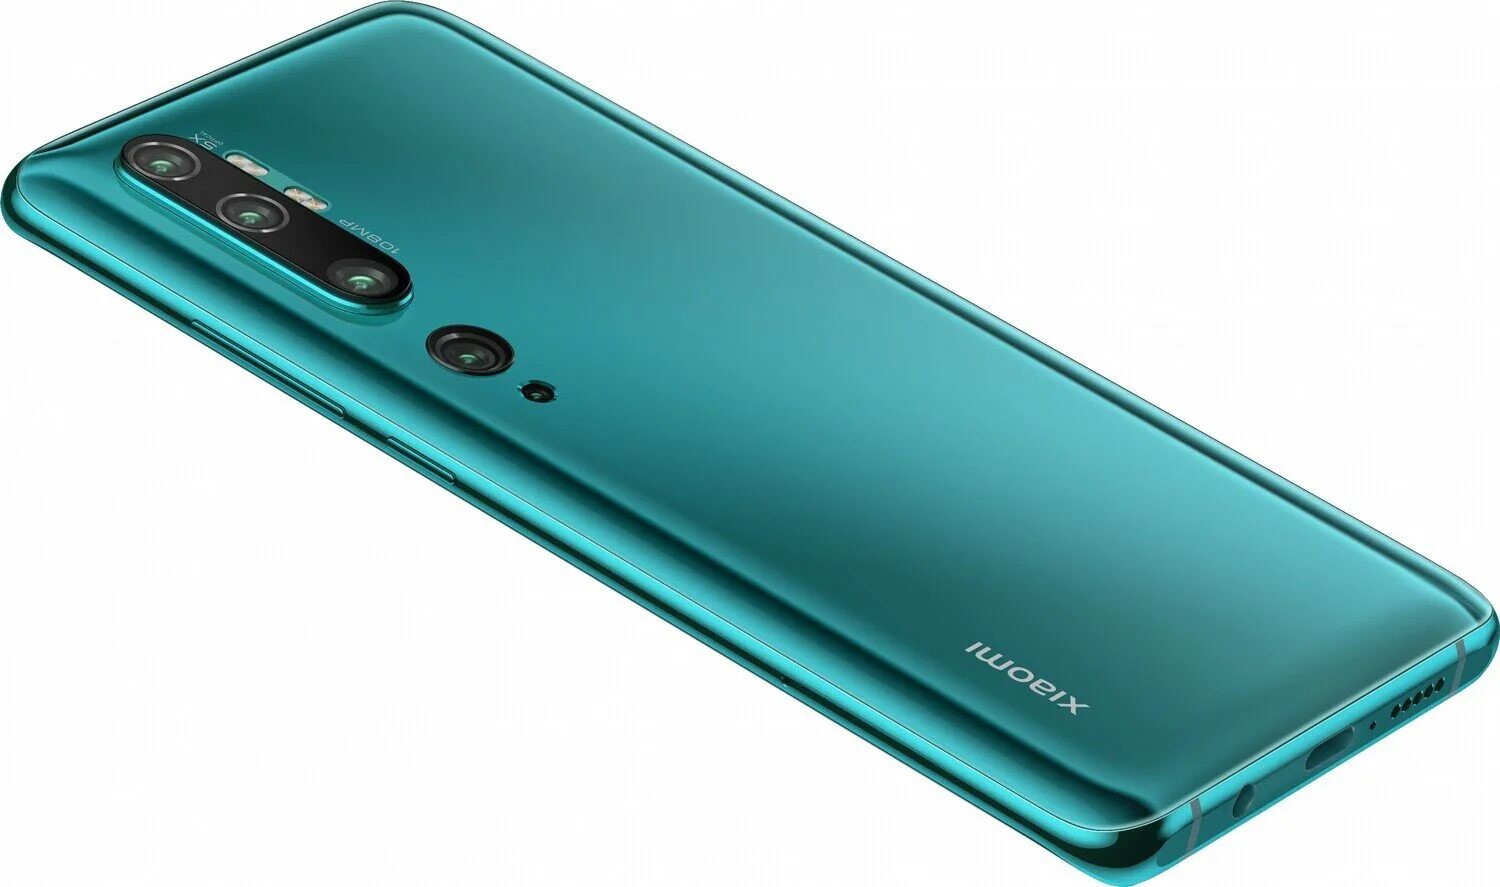 Xiaomi Note 10 Pro. Xiaomi mi Note 10. Xiaomi mi Note 10 6/128gb. Смартфон Xiaomi mi Note 10 Pro 8/256gb. Xiaomi note 10s 6 128